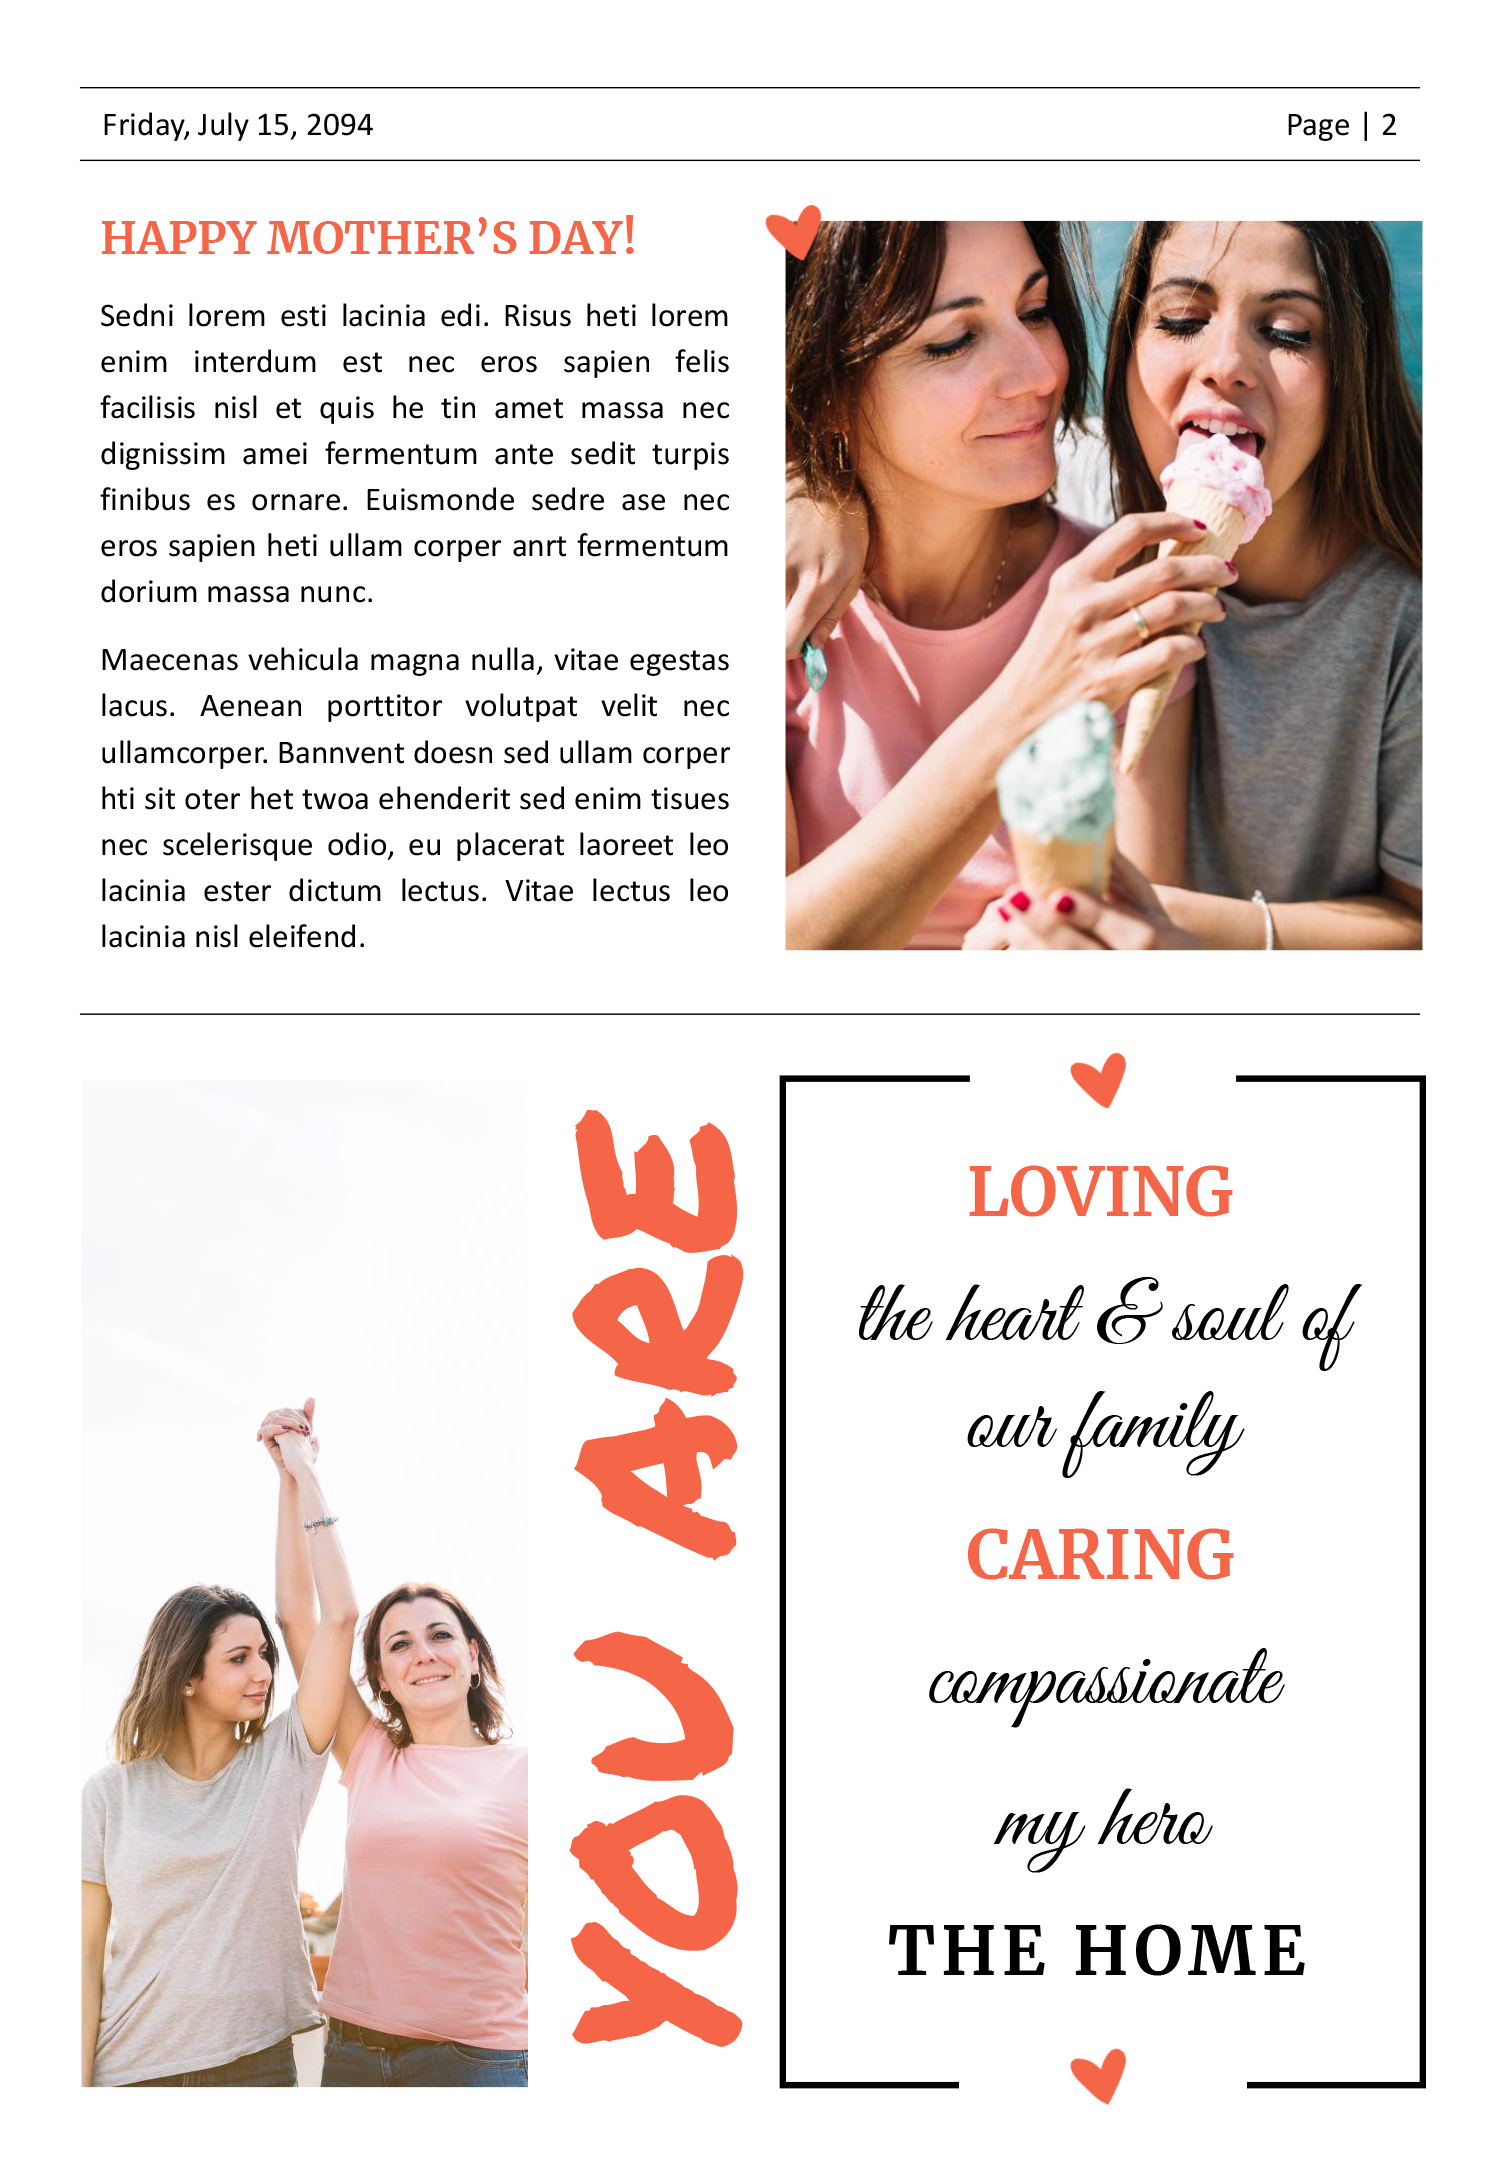 Mothers Day Newspaper Template - Page 02